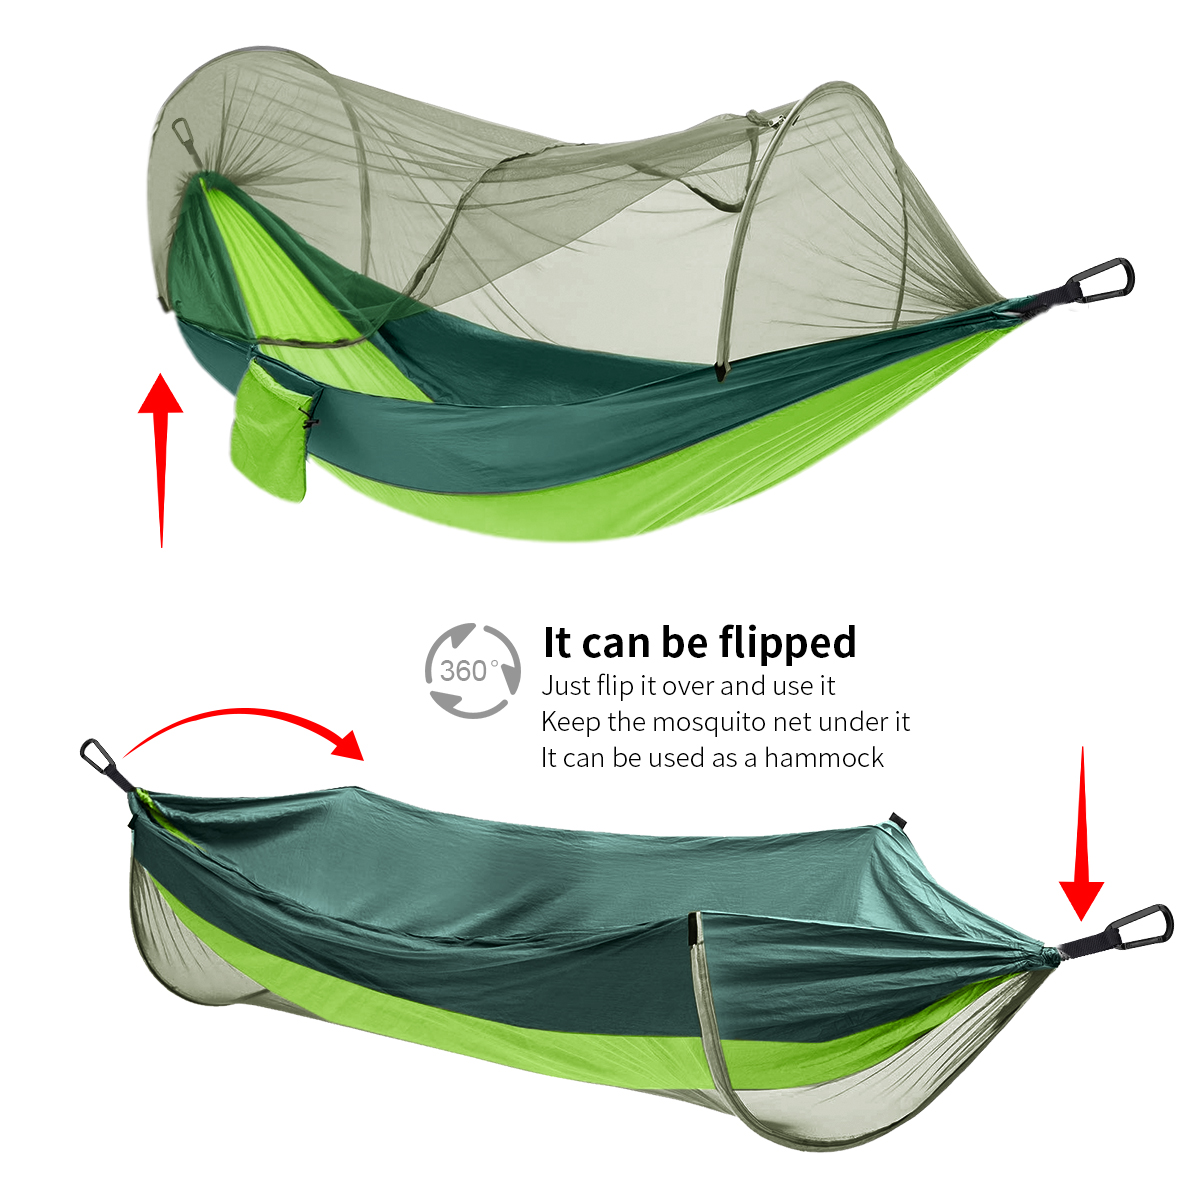 2-People-Outdoor-Camping-Nylon-Strong-Hammock-W-Mosquito-Net-Travel-Portable-Backpack-Hammock-Max-Lo-1732116-8